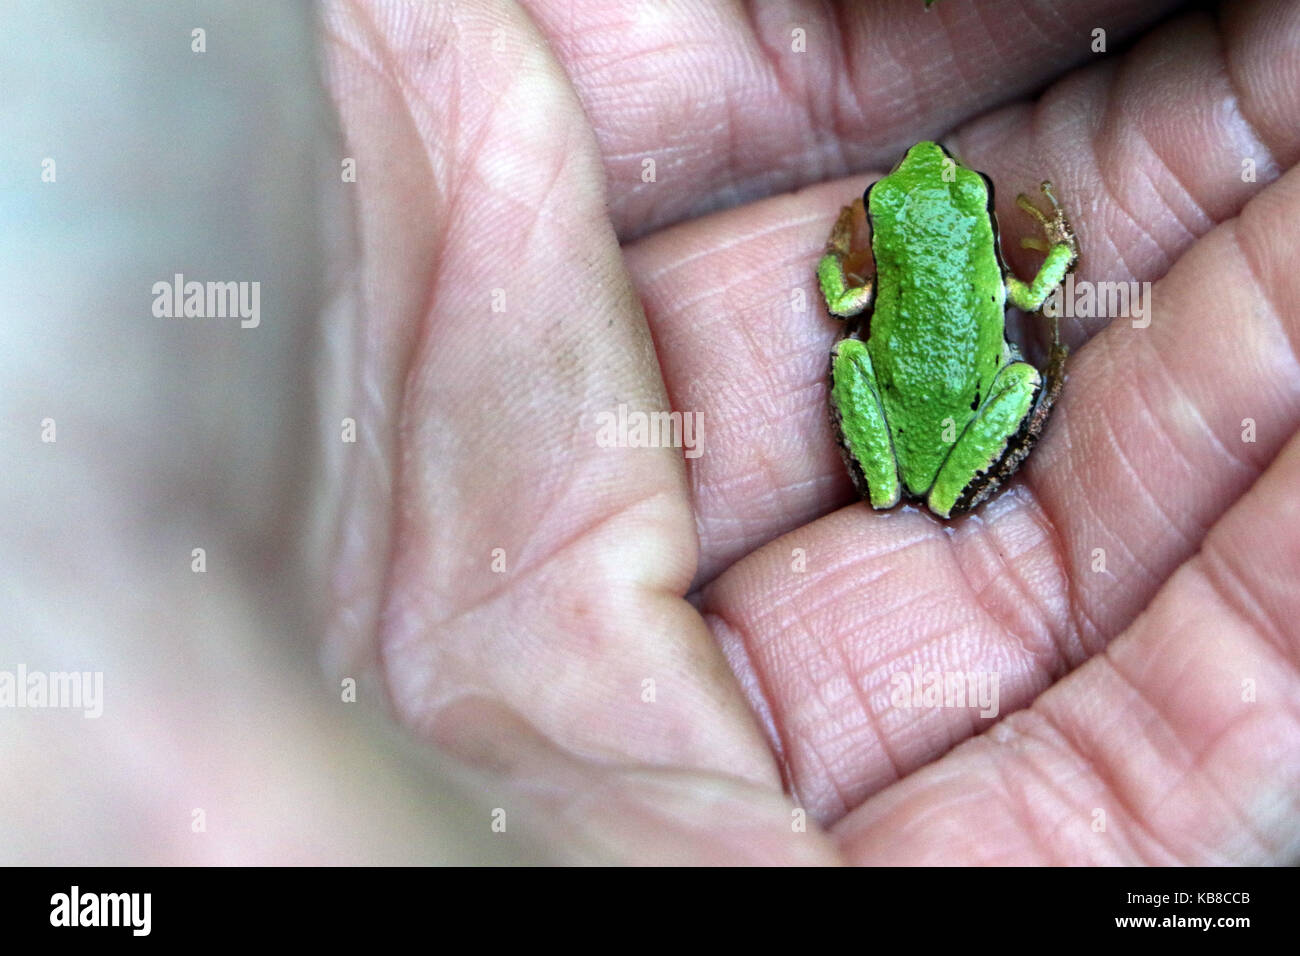 tiny frog in a man's hand Stock Photo